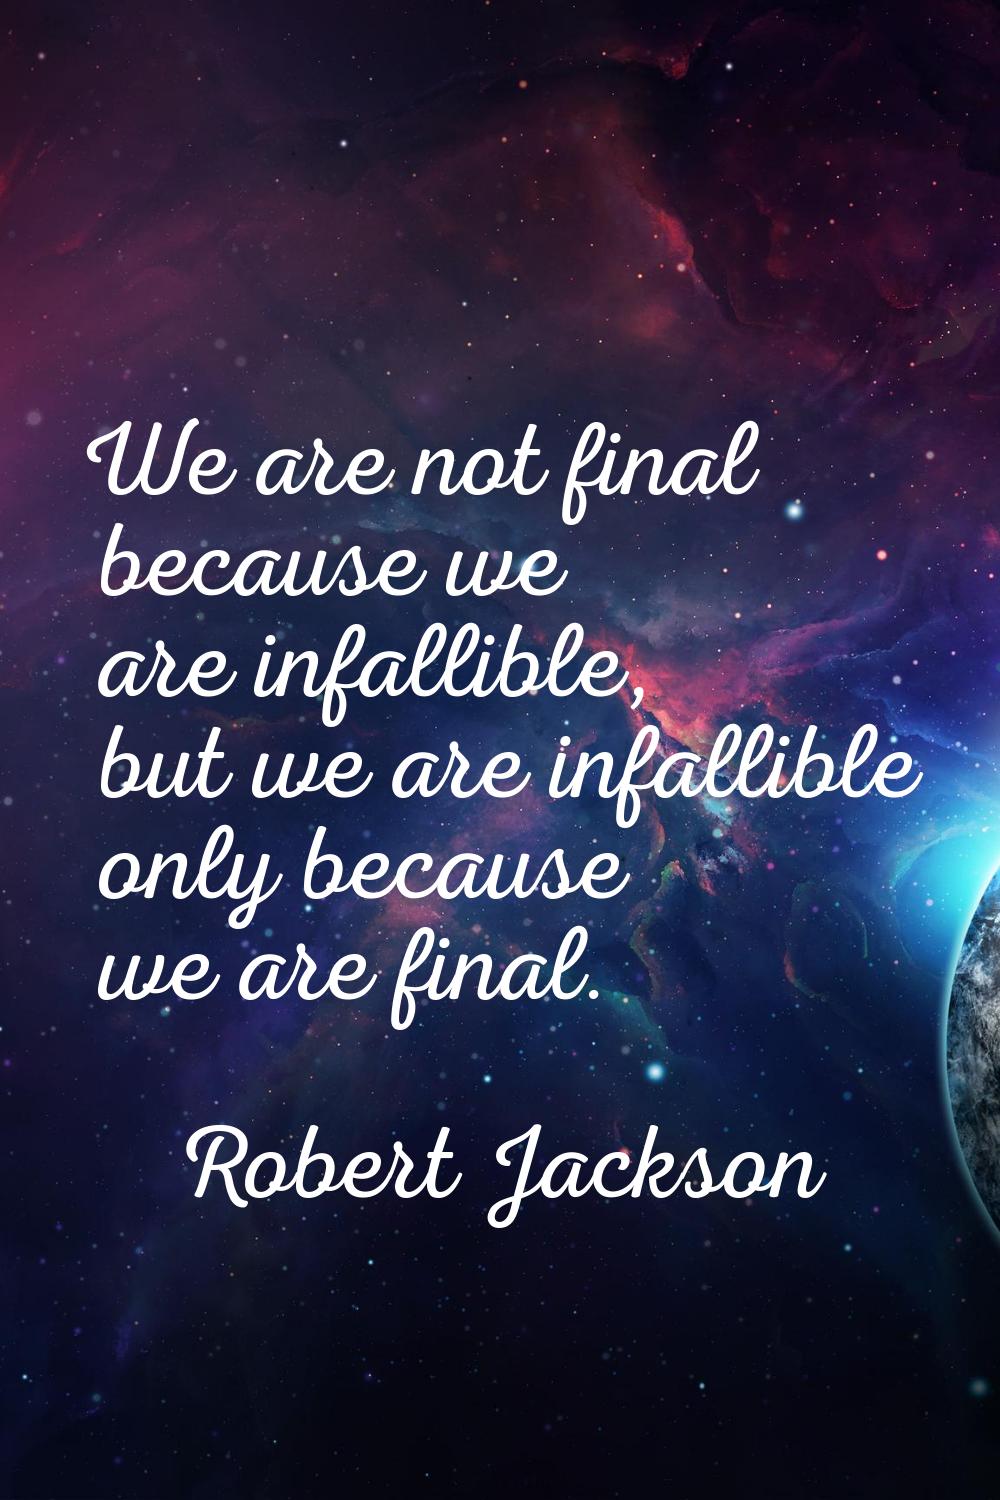 We are not final because we are infallible, but we are infallible only because we are final.